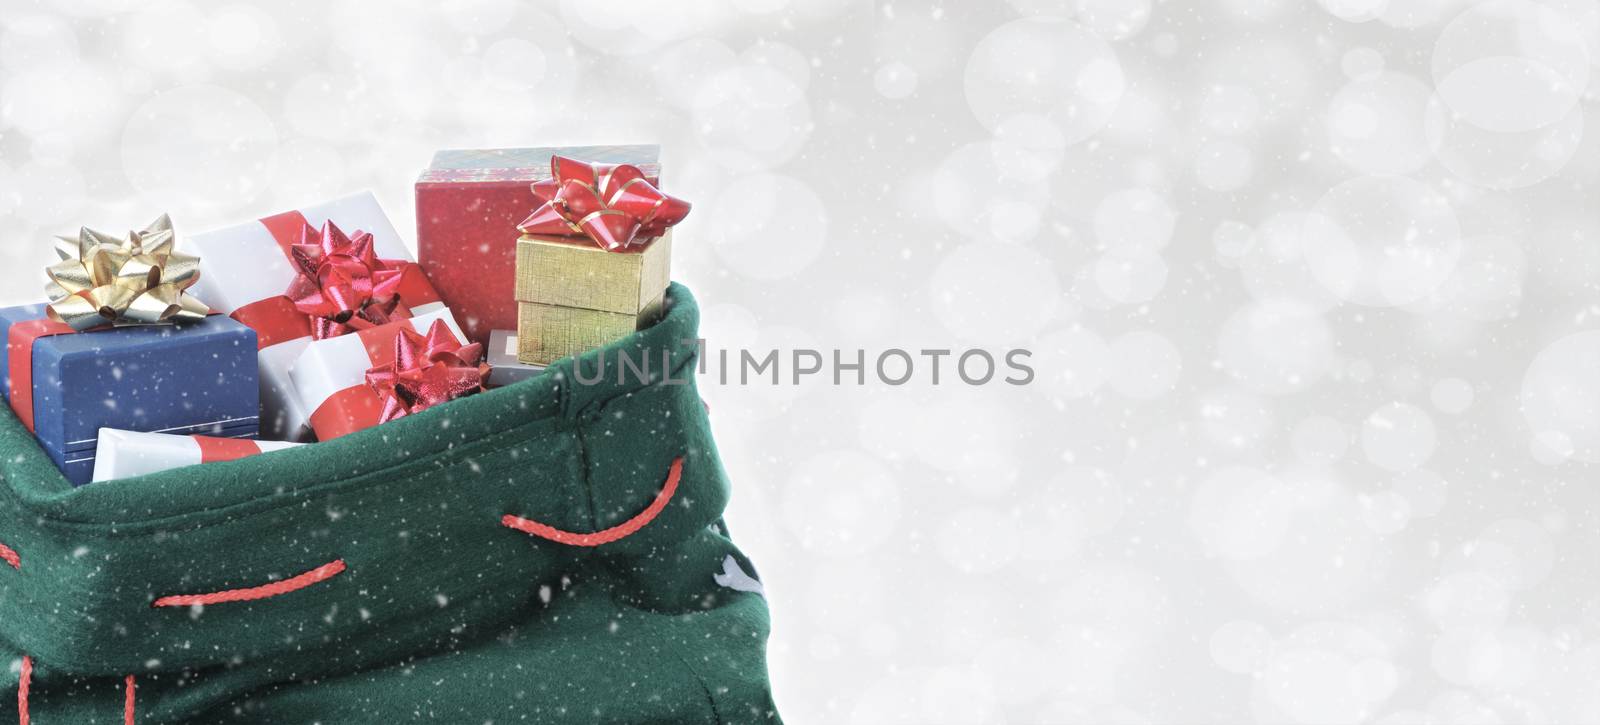 Santa Claus toy bag on a silver bokeh background with snow effect. Room For Copy.